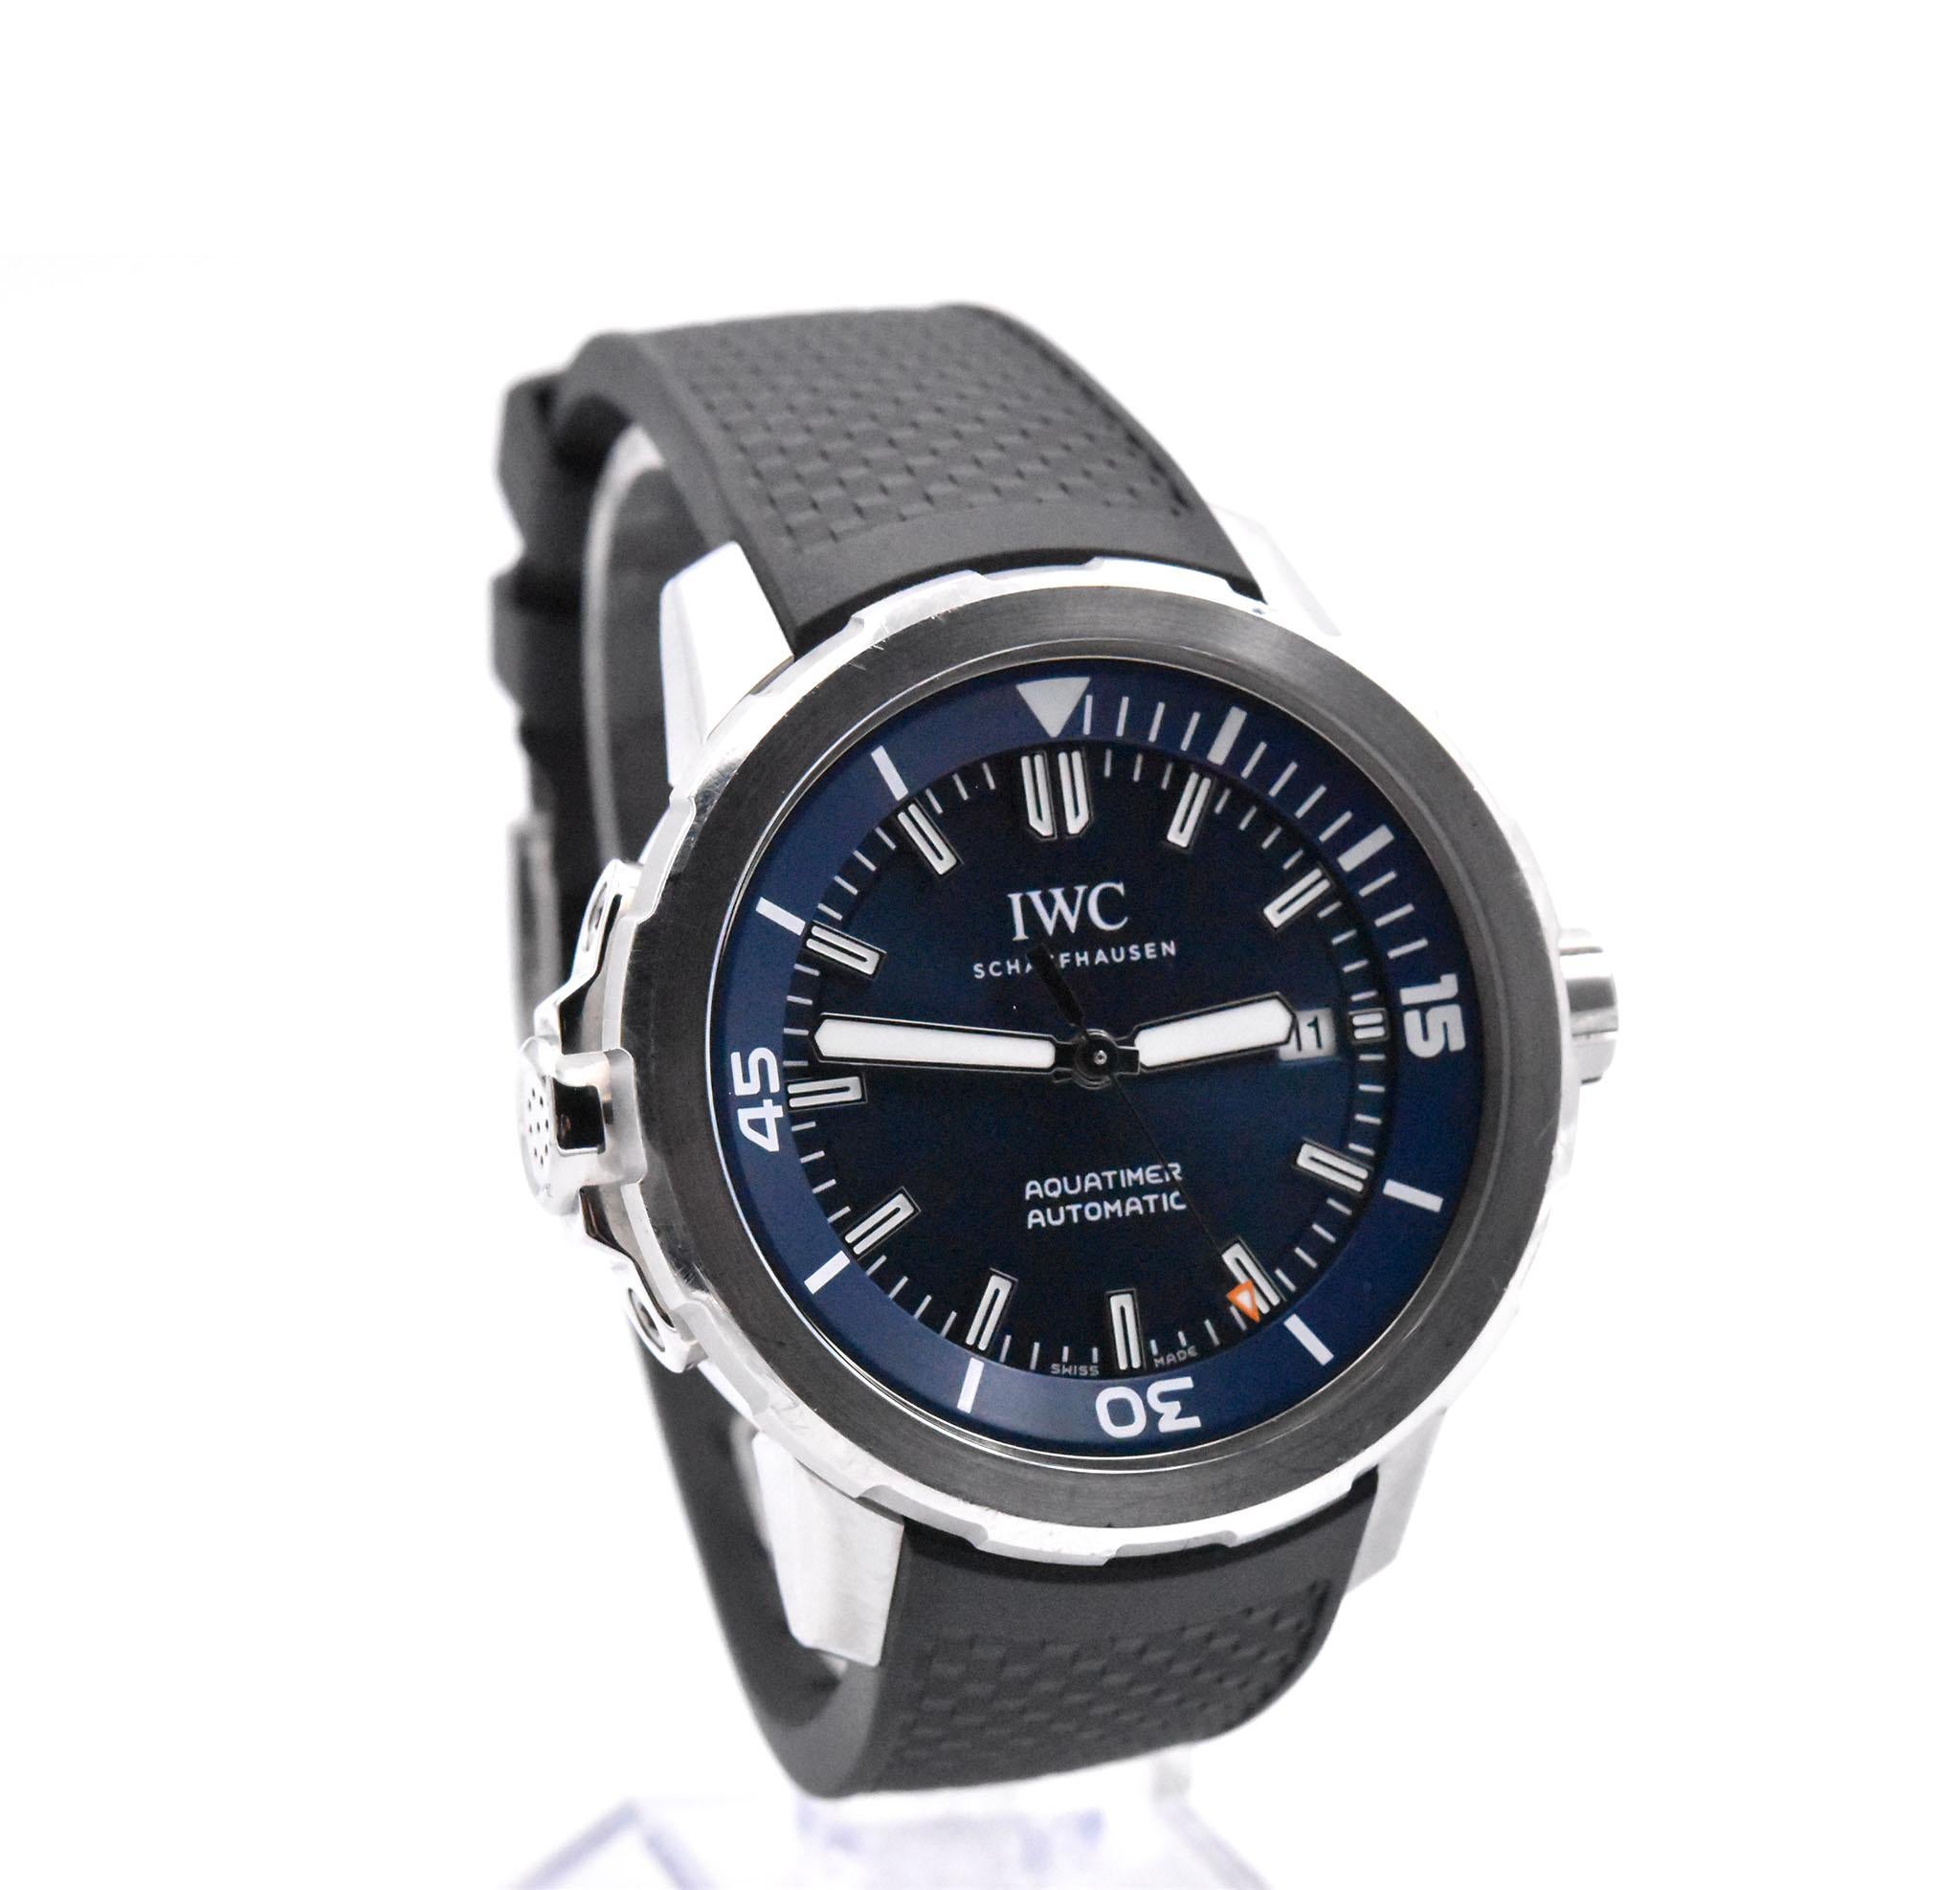 Movement: automatic caliber 30120
Function: hours, minutes, seconds, date
Case: 42mm stainless steel case, sapphire crystal, screw down crown
Band: black rubber IWC bracelet with quick-change system
Dial: Blue dial with luminescence
Reference #: